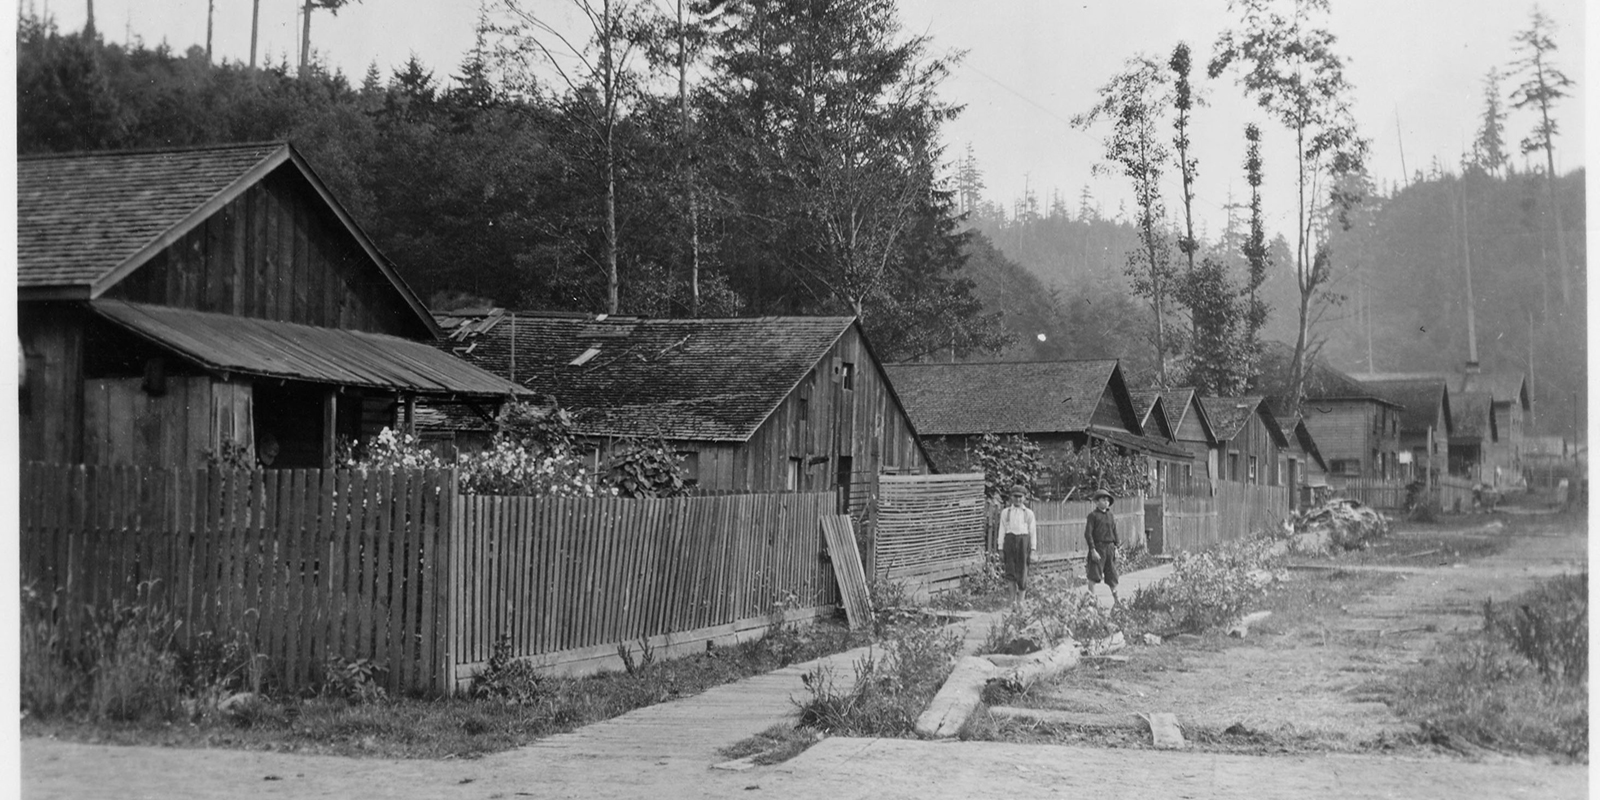 A 1922 photo of woden houses in a row with two people standing in front of the houses